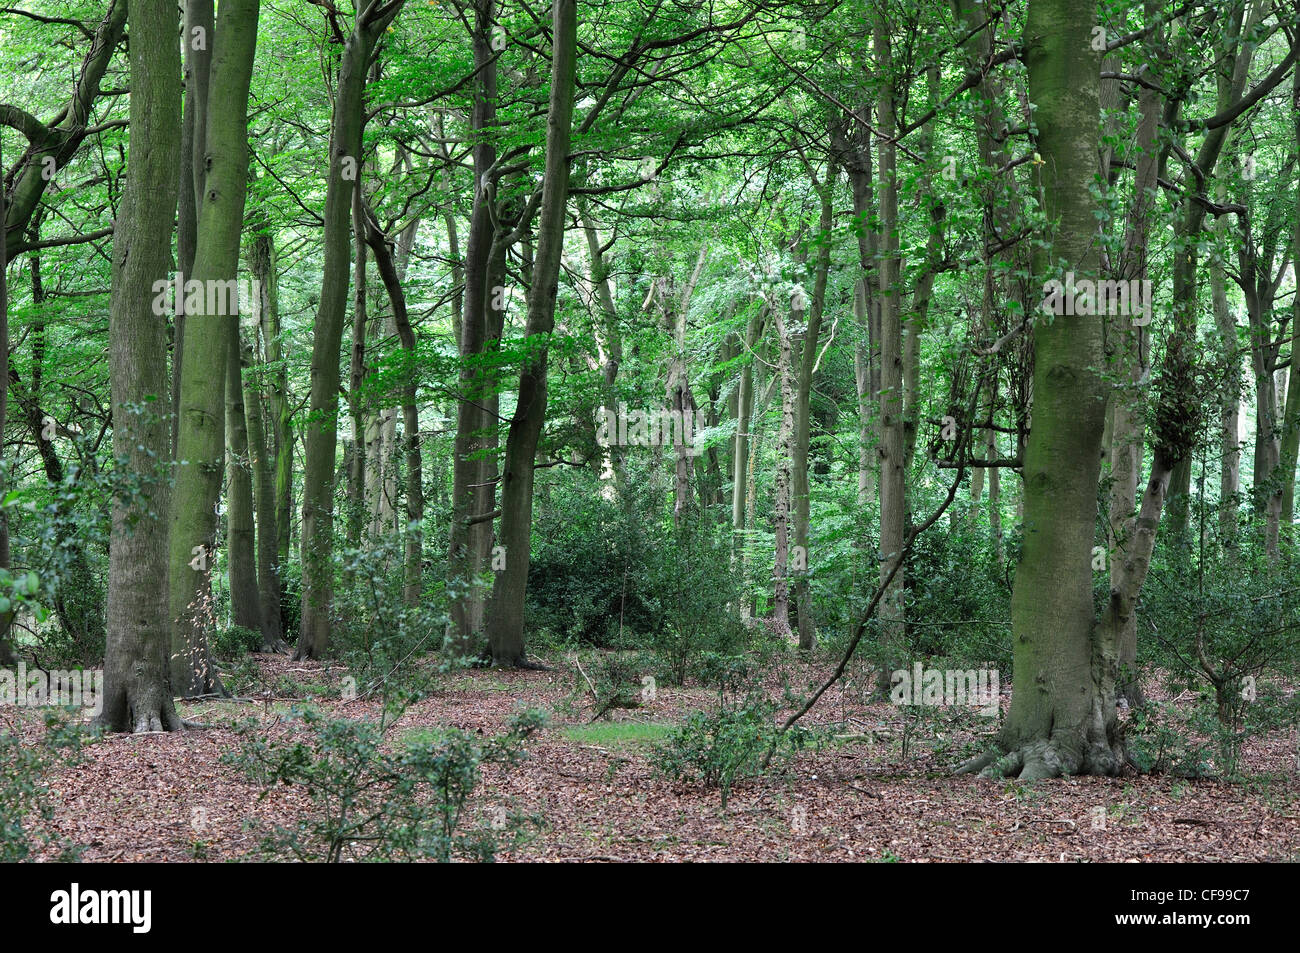 A view of Clayhill Wood, Stoke Row, Oxfordshire, UK August 2011 Stock Photo